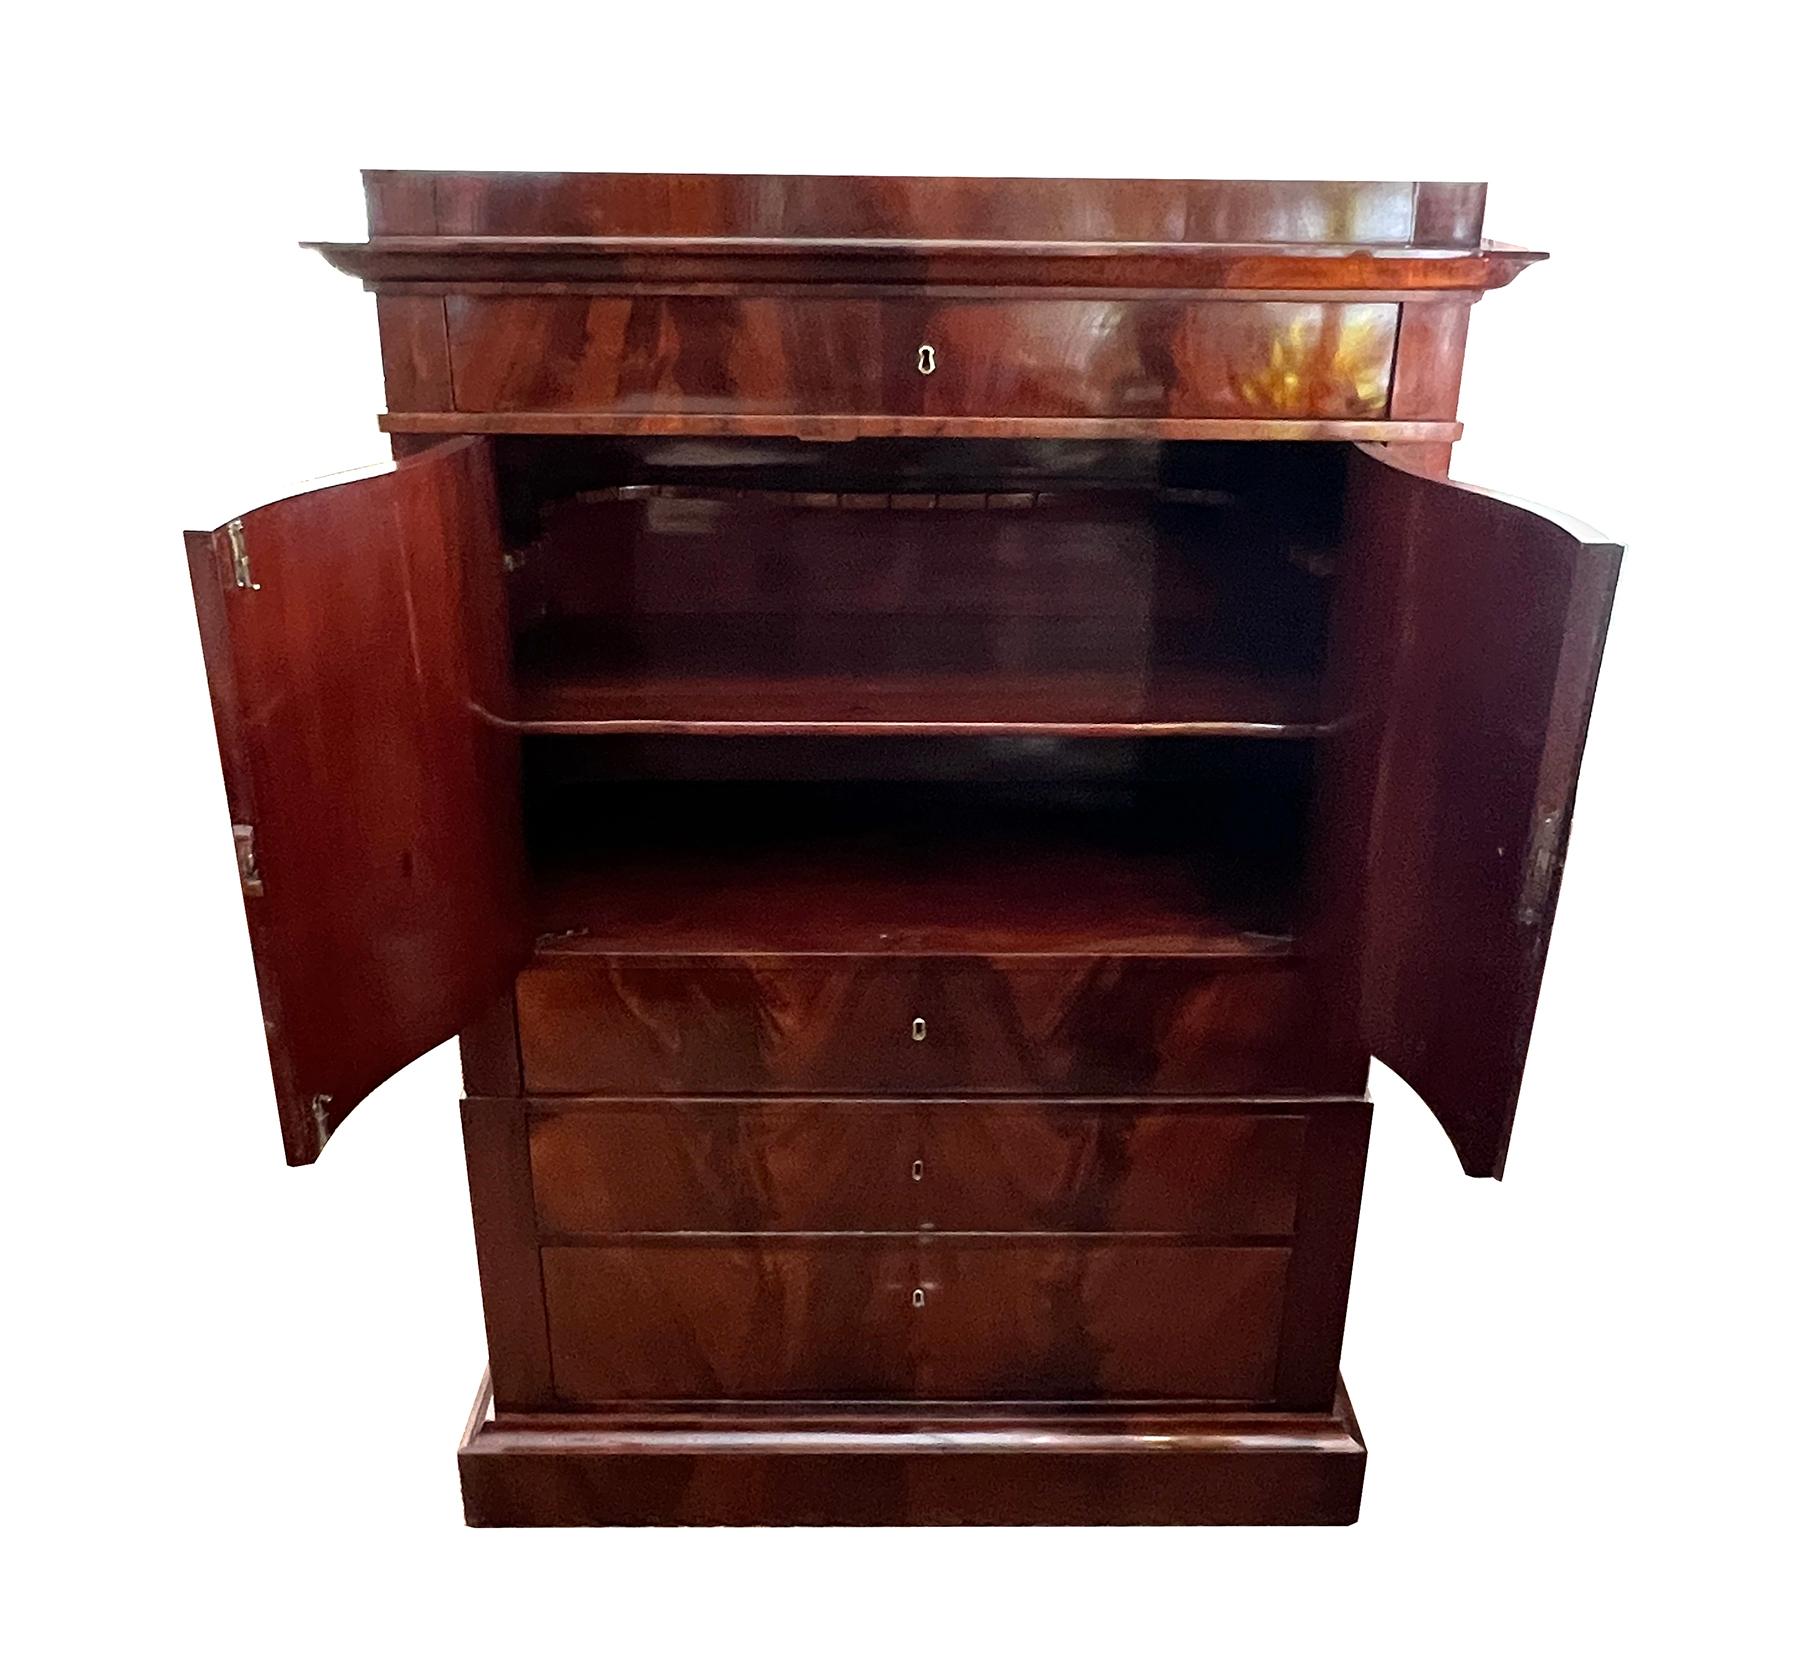 Early 19th Century Danish Empire Tall Chest of Drawers in Book-Matched Flame Mahogany Veneer For Sale